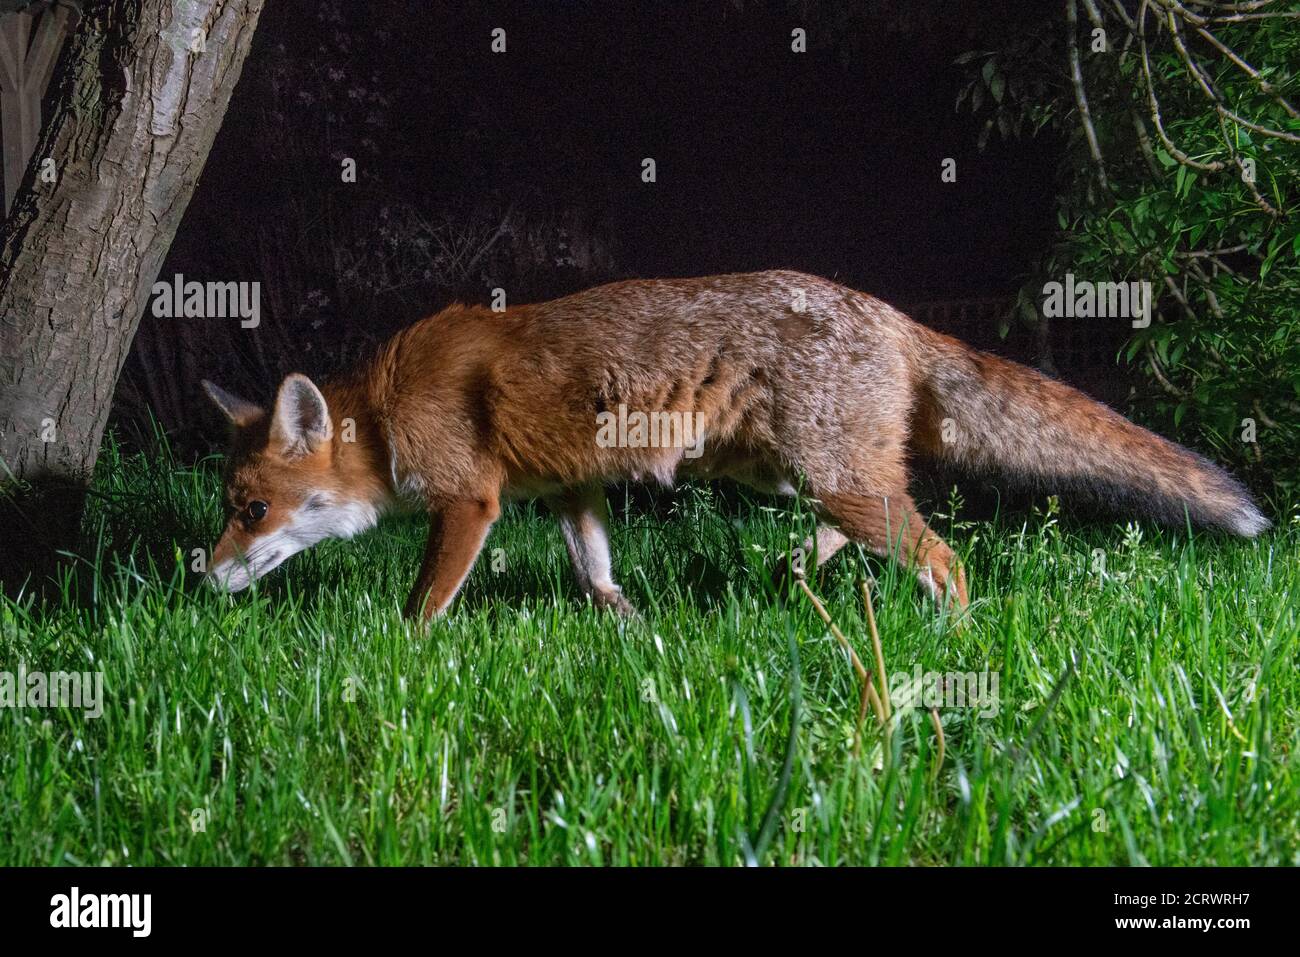 Fox at night, vixen in search of food walking to the left sniffing the grass Stock Photo